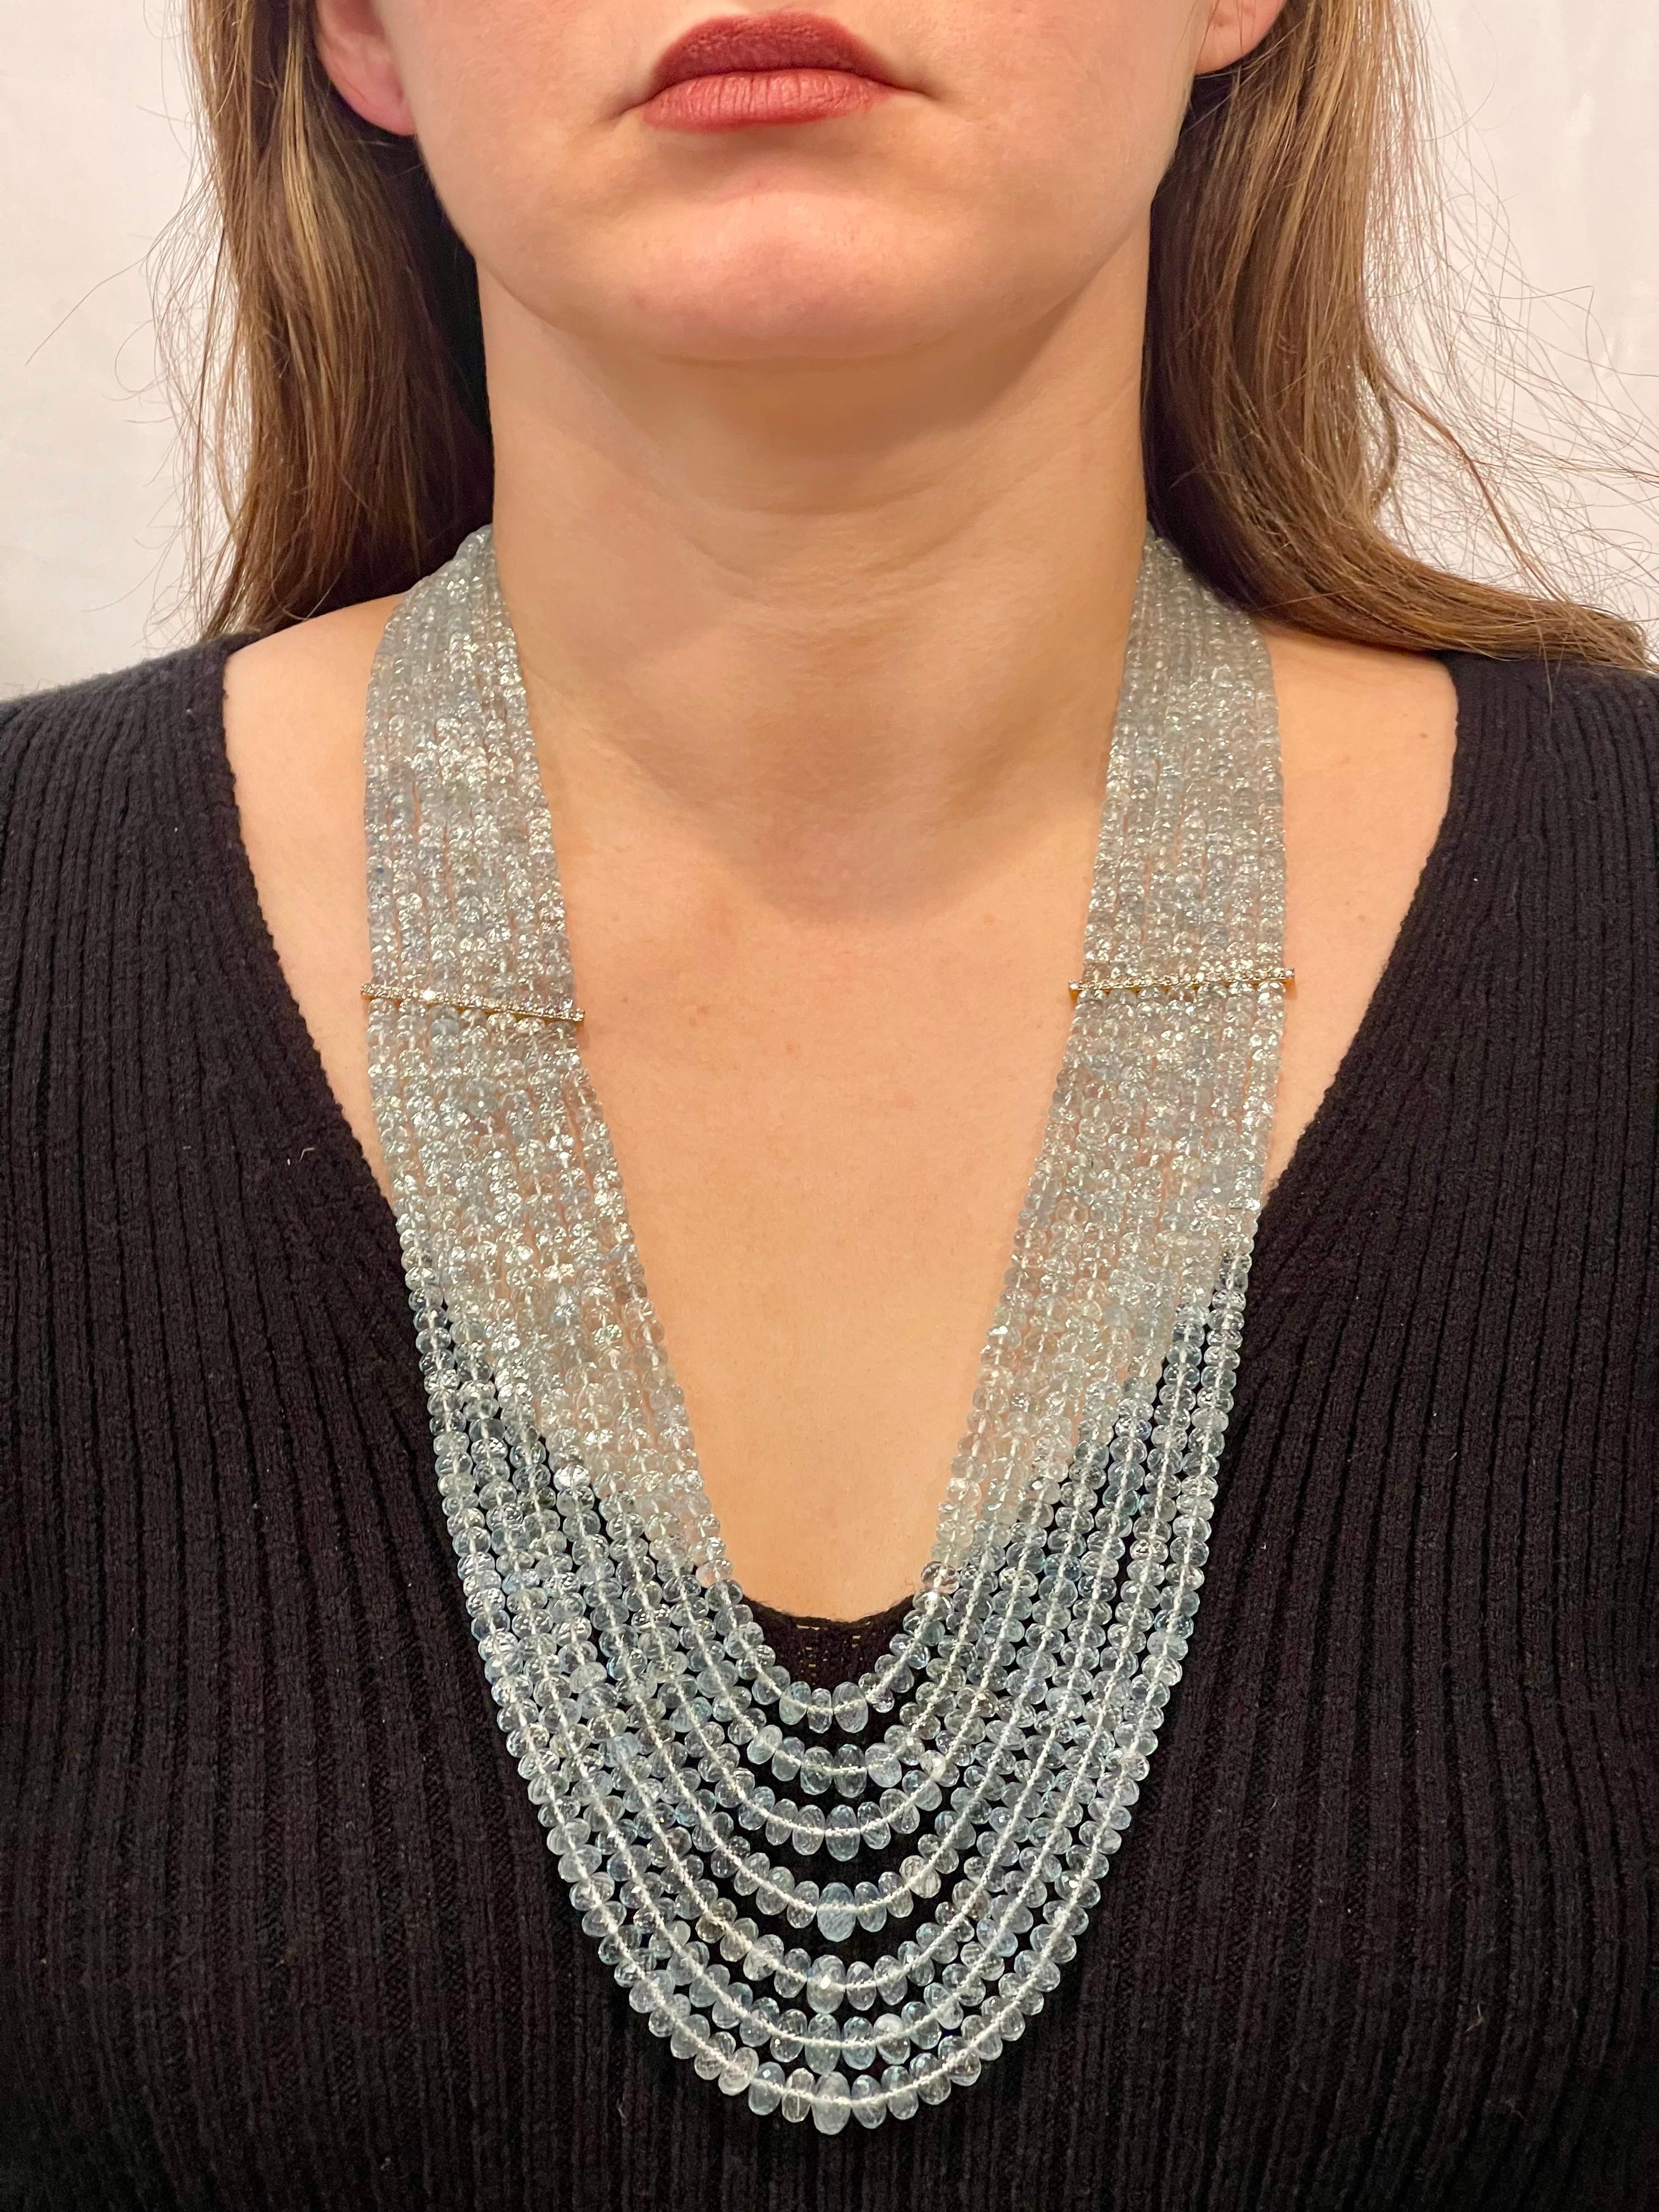 7 layer necklace